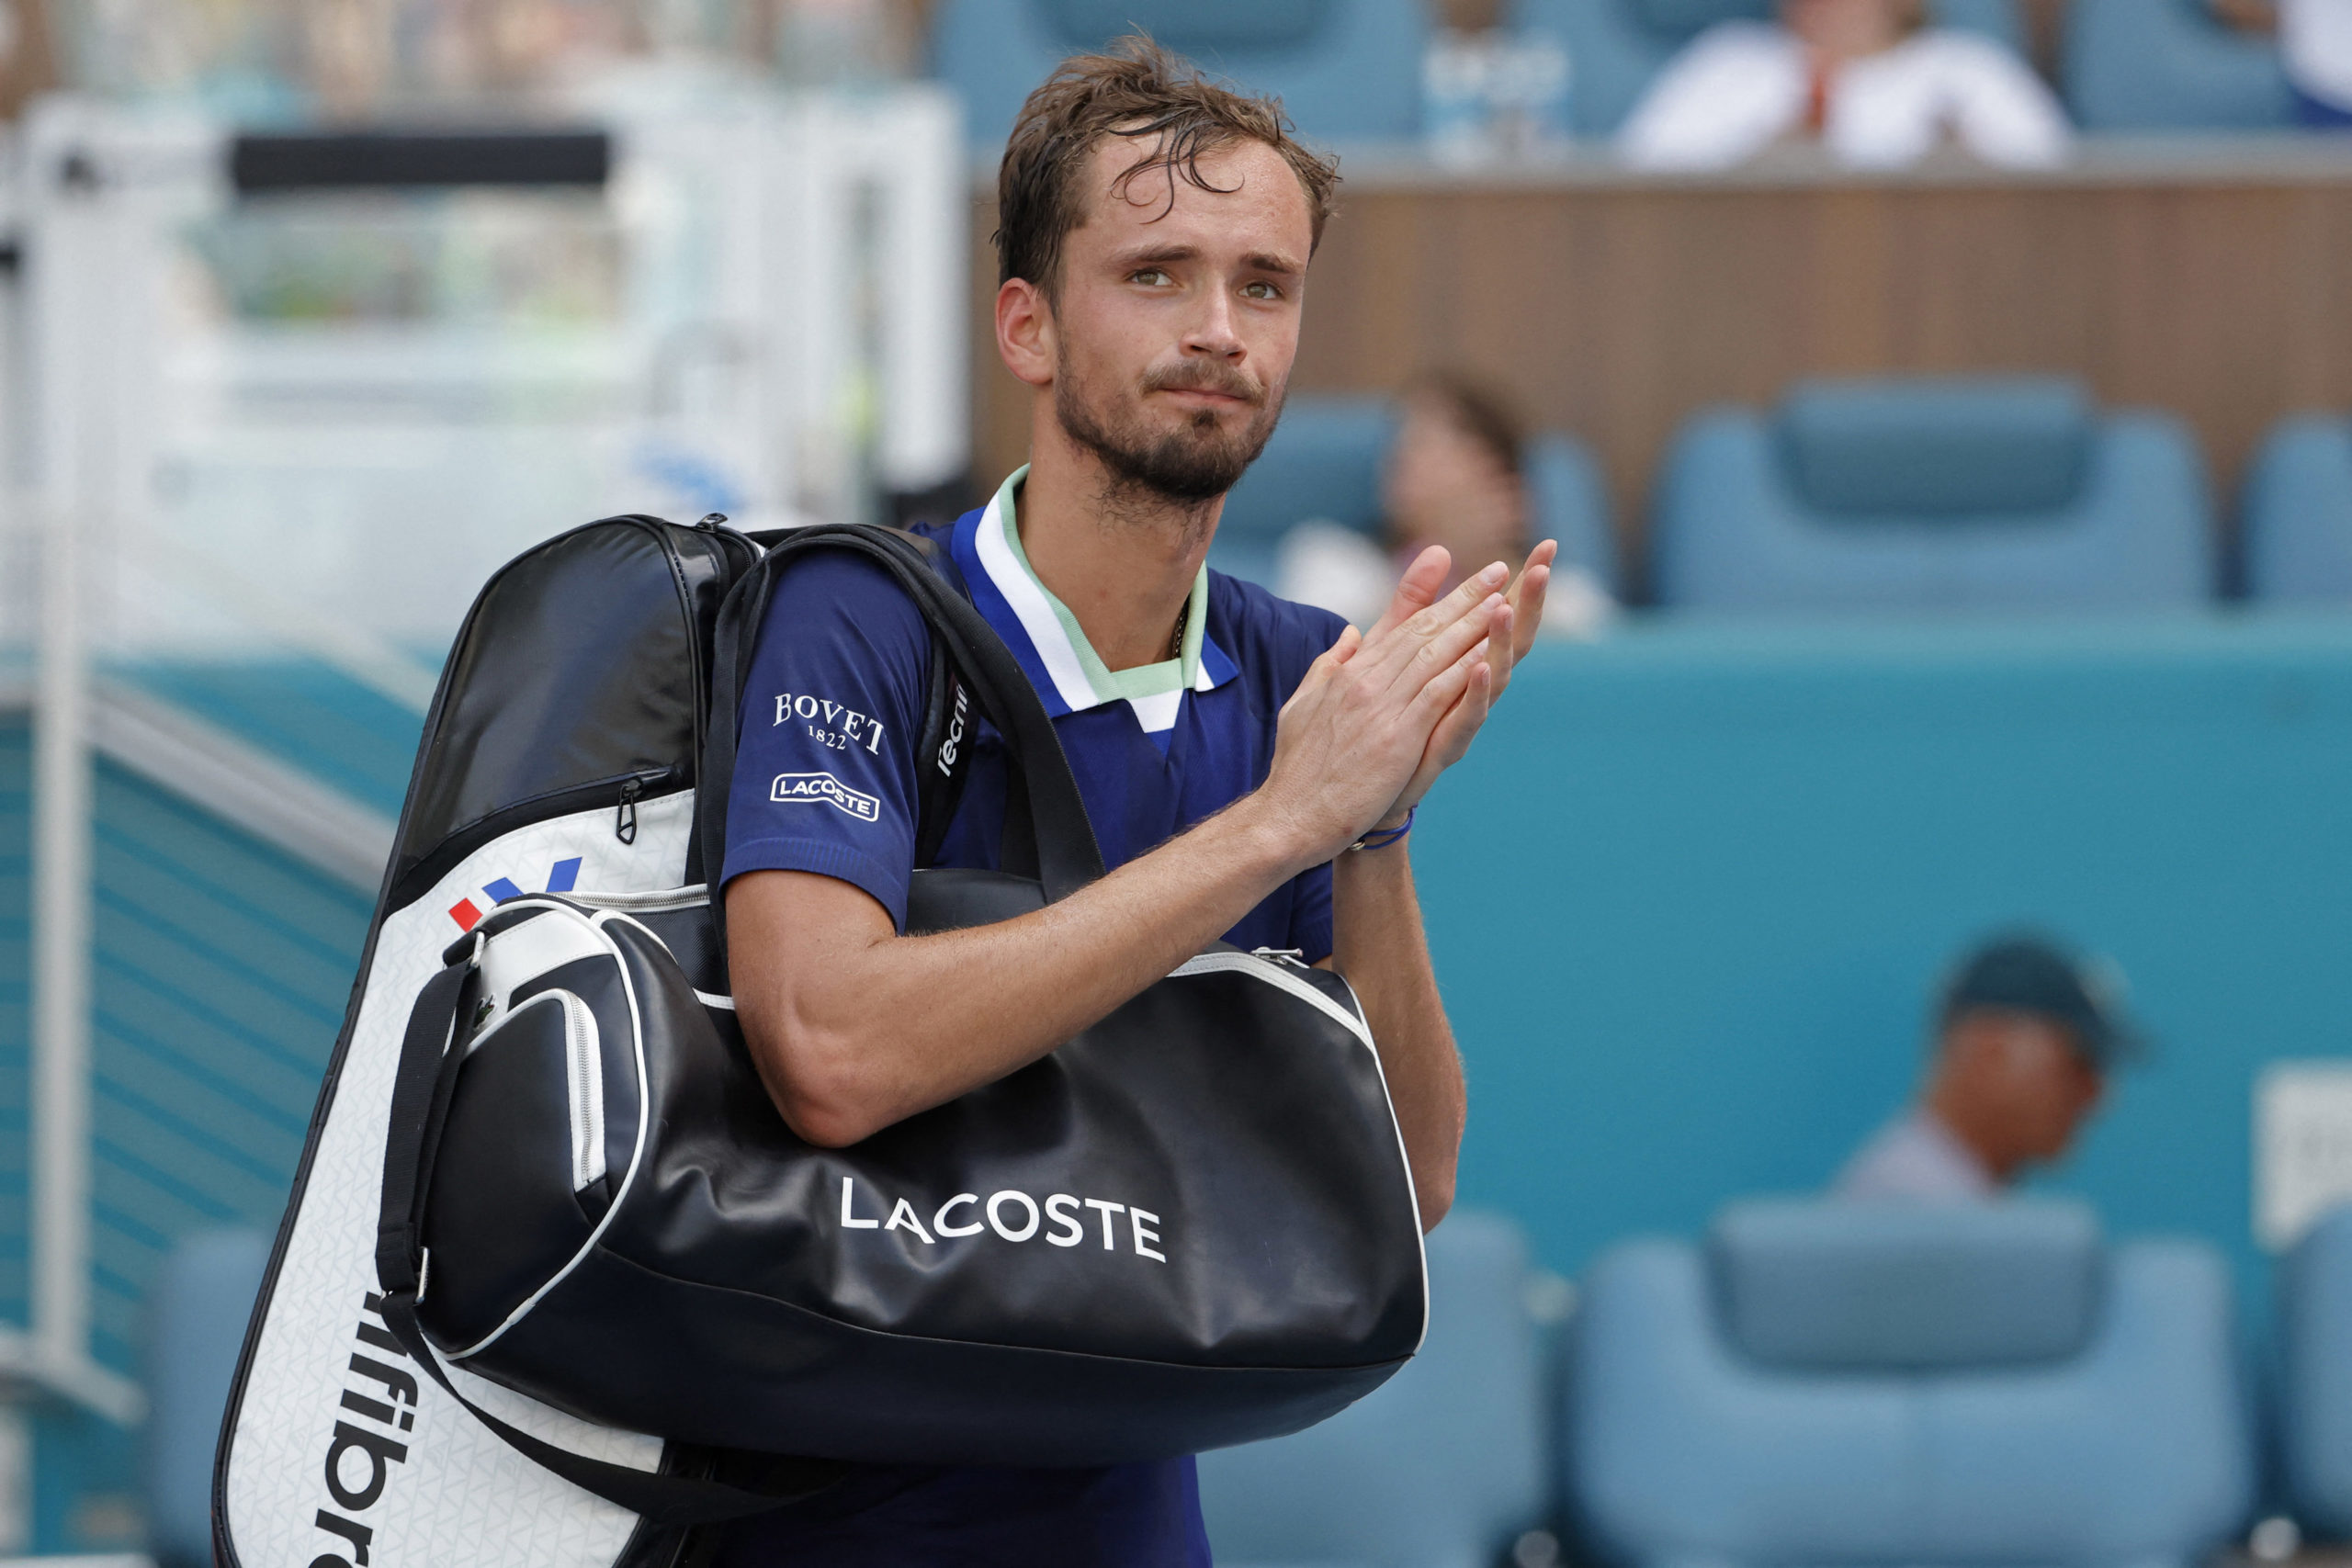 FILE PHOTO: Mar 31, 2022; Miami Gardens, FL, USA; Daniil Medvedev acknowledges the crowd while leaving the court after his match against Hubert Hurkacz (POL)(not pictured) in a men's singles quarterfinal in the Miami Open at Hard Rock Stadium.